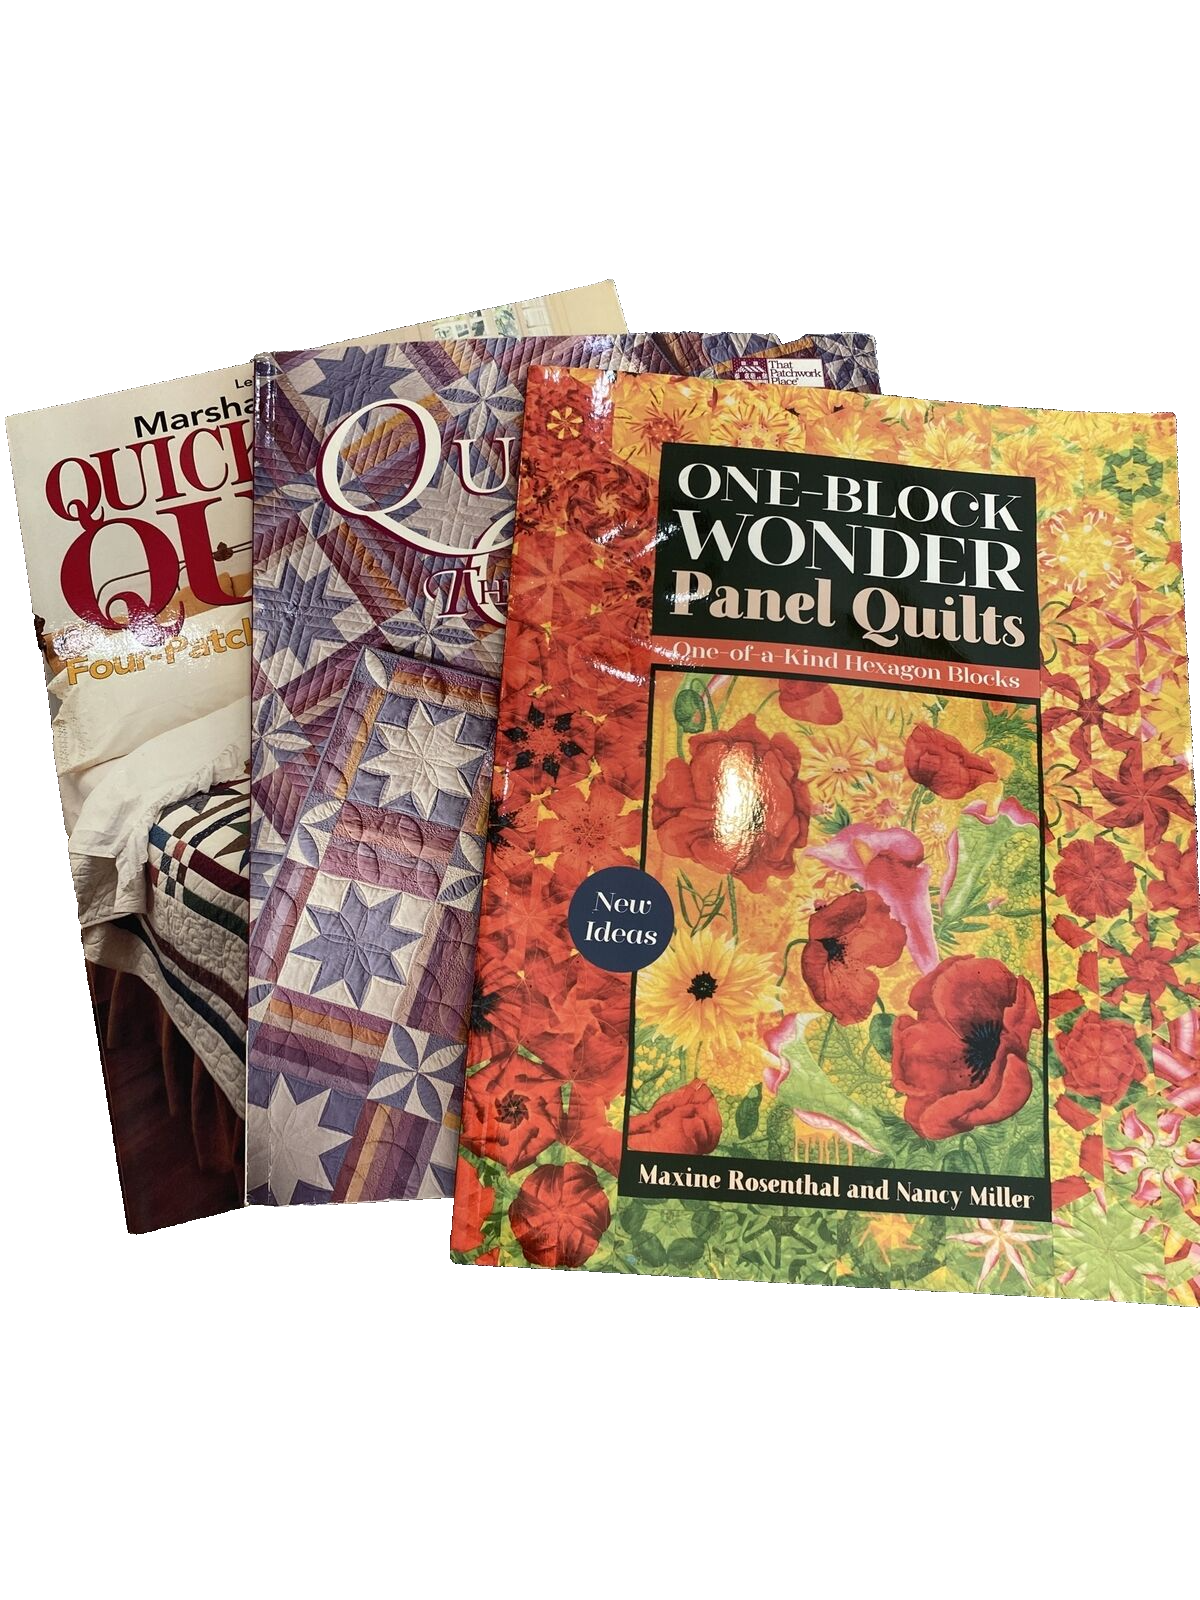 Lot of 3 Quilt Pattern Books Paperback - $23.74